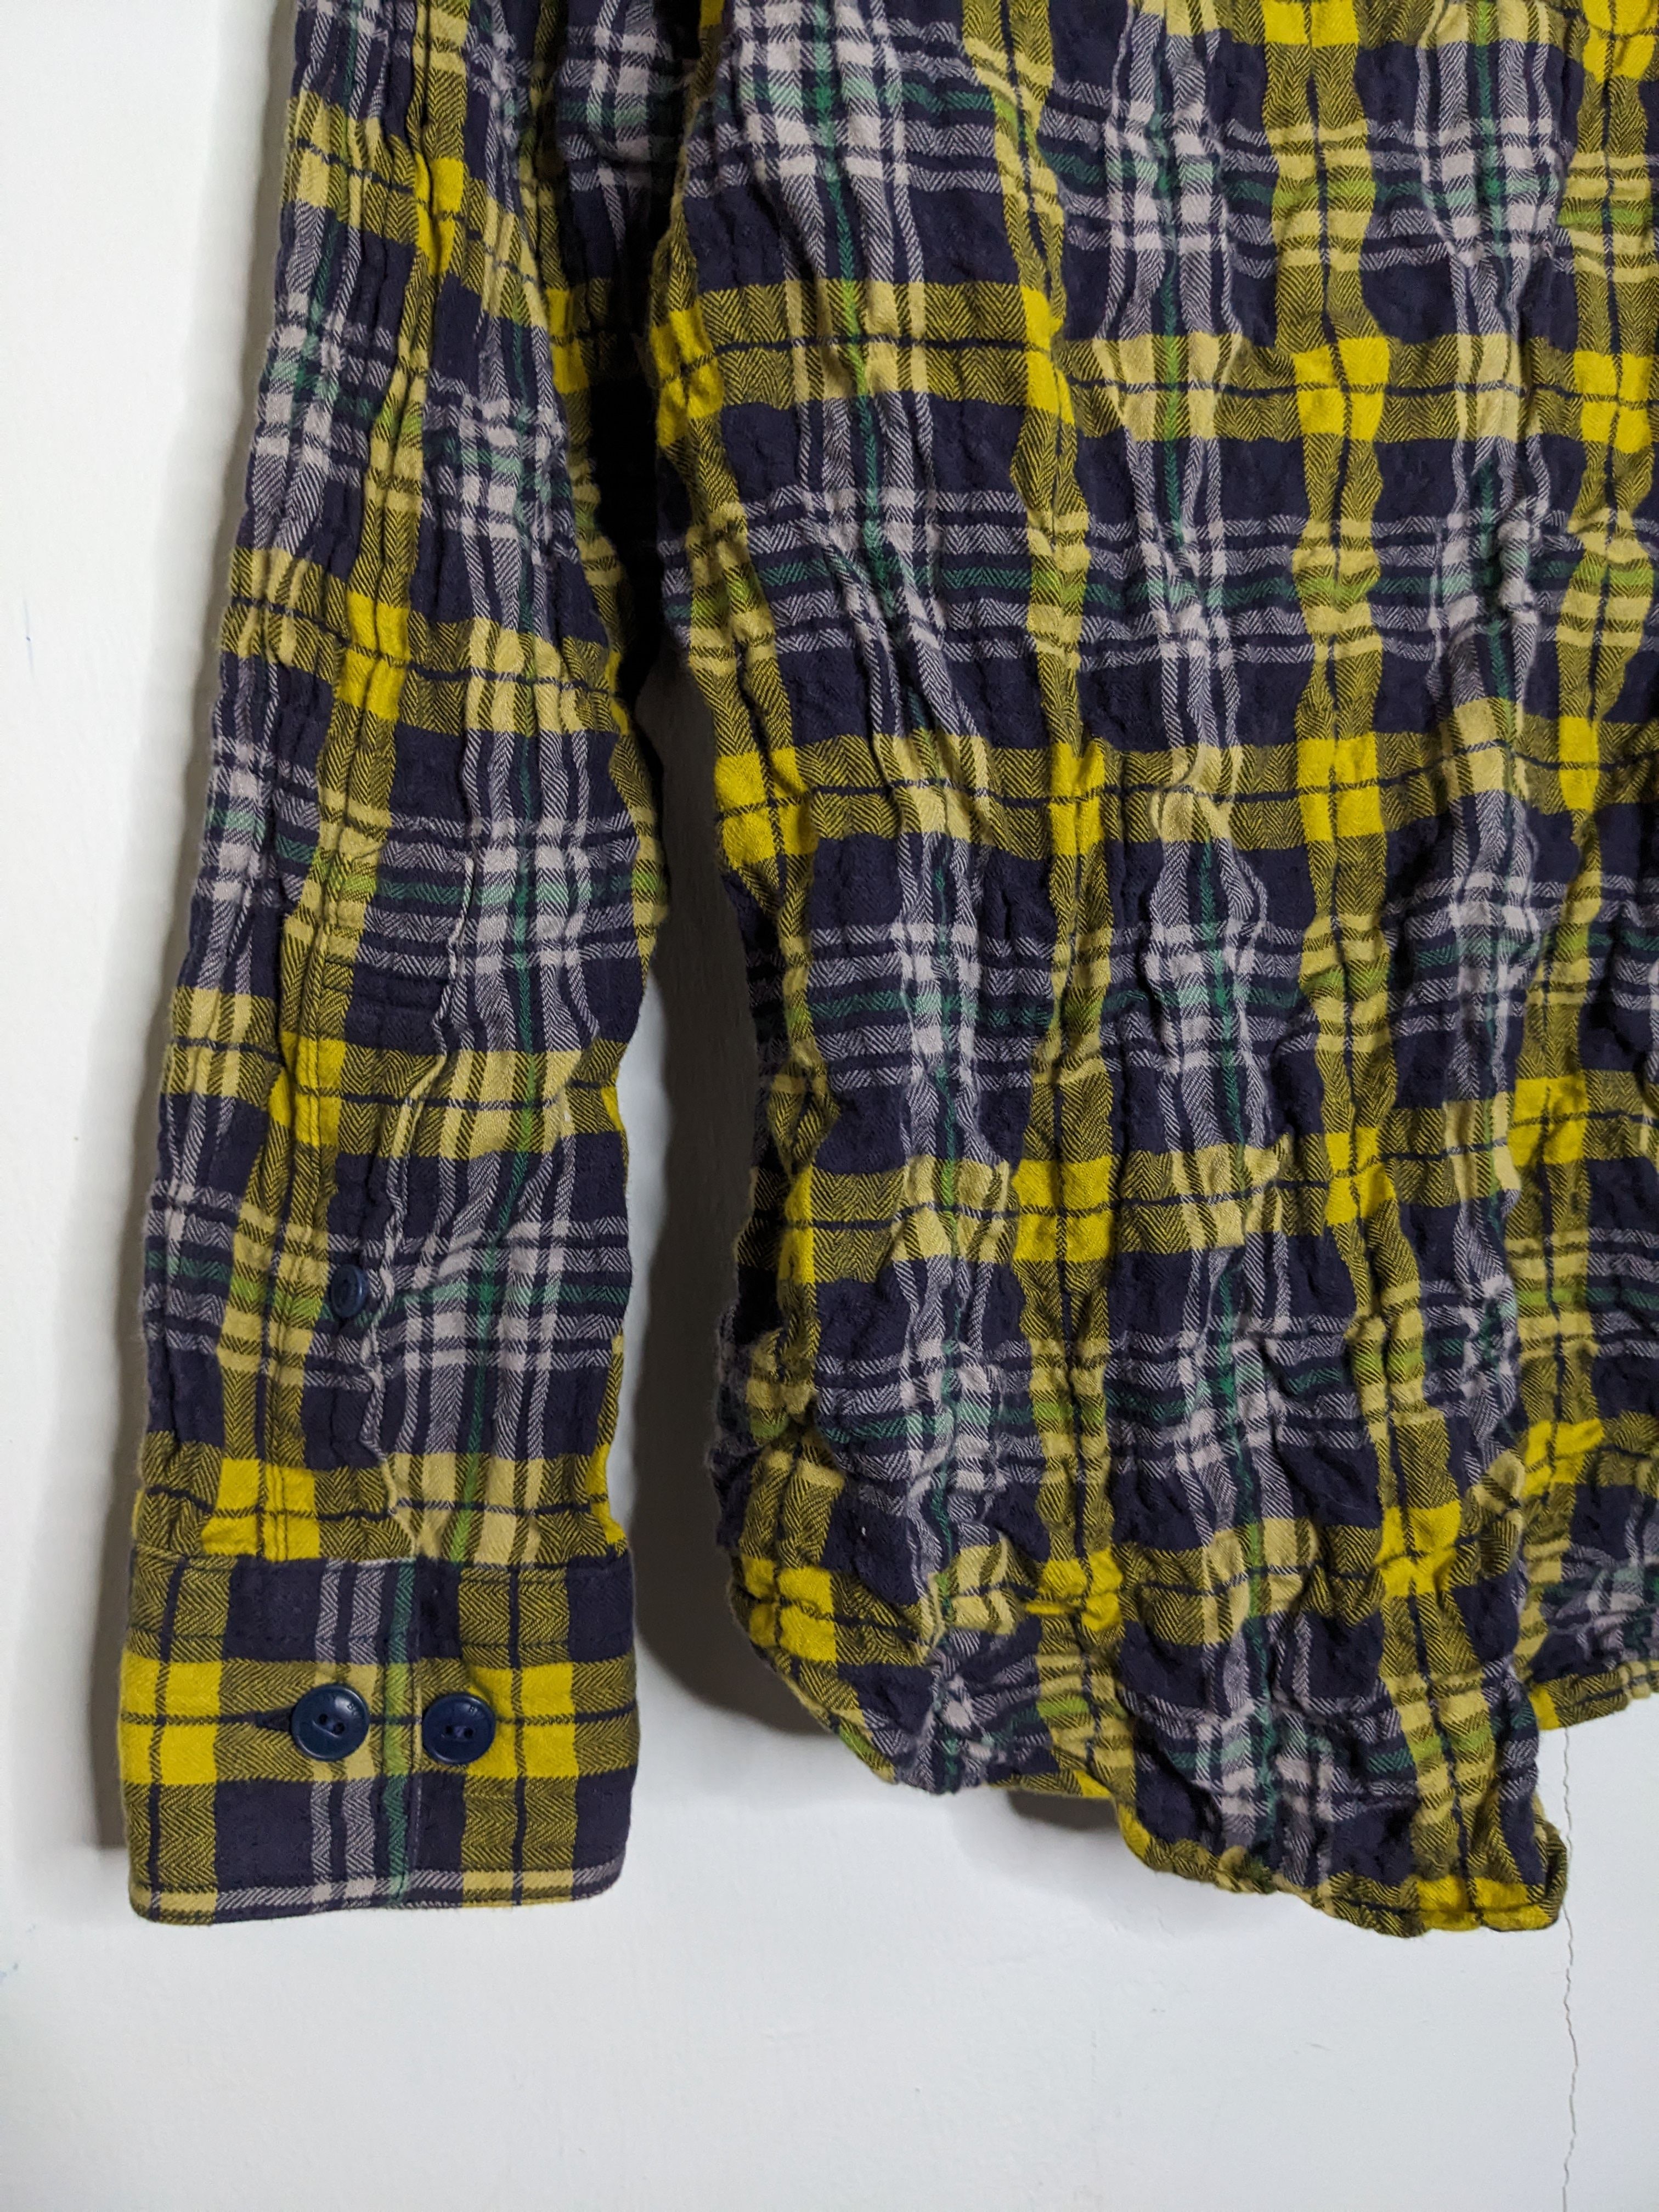 Burberry London Wrinkle Style Checked Plaid Flannel Shirt - 5